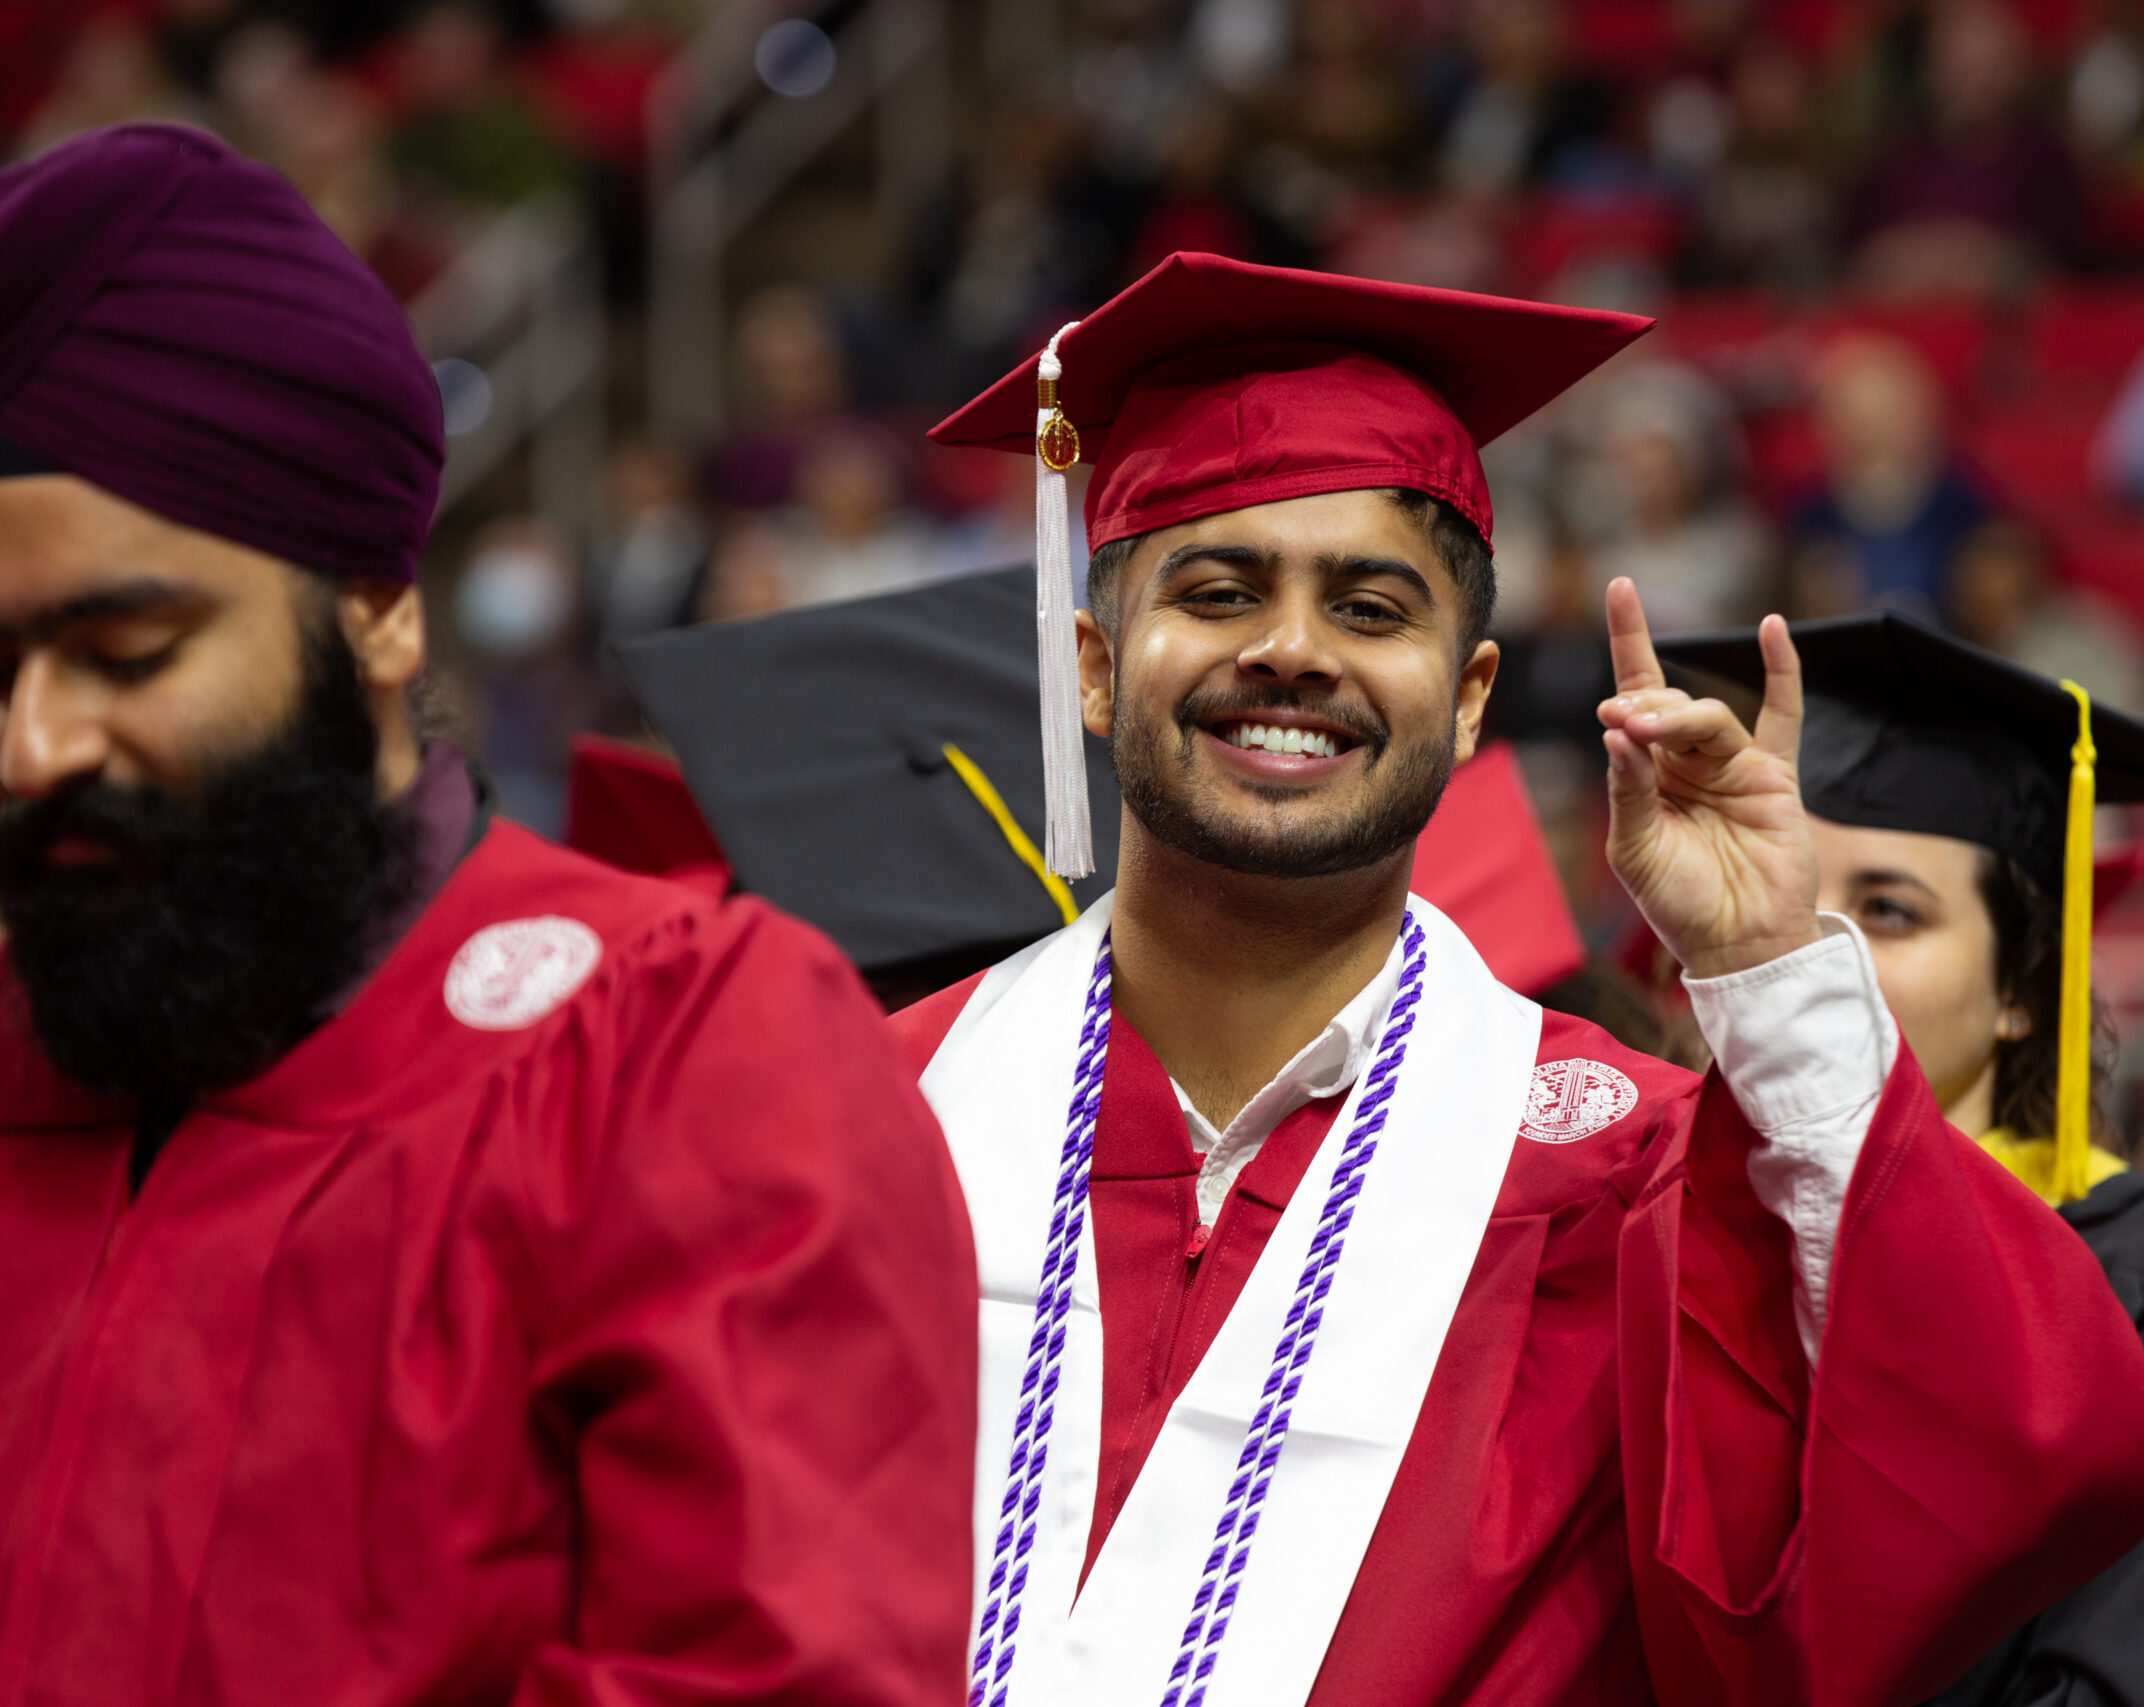 Undergraduate makes wolf hand sign at Fall 2022 Commencement.